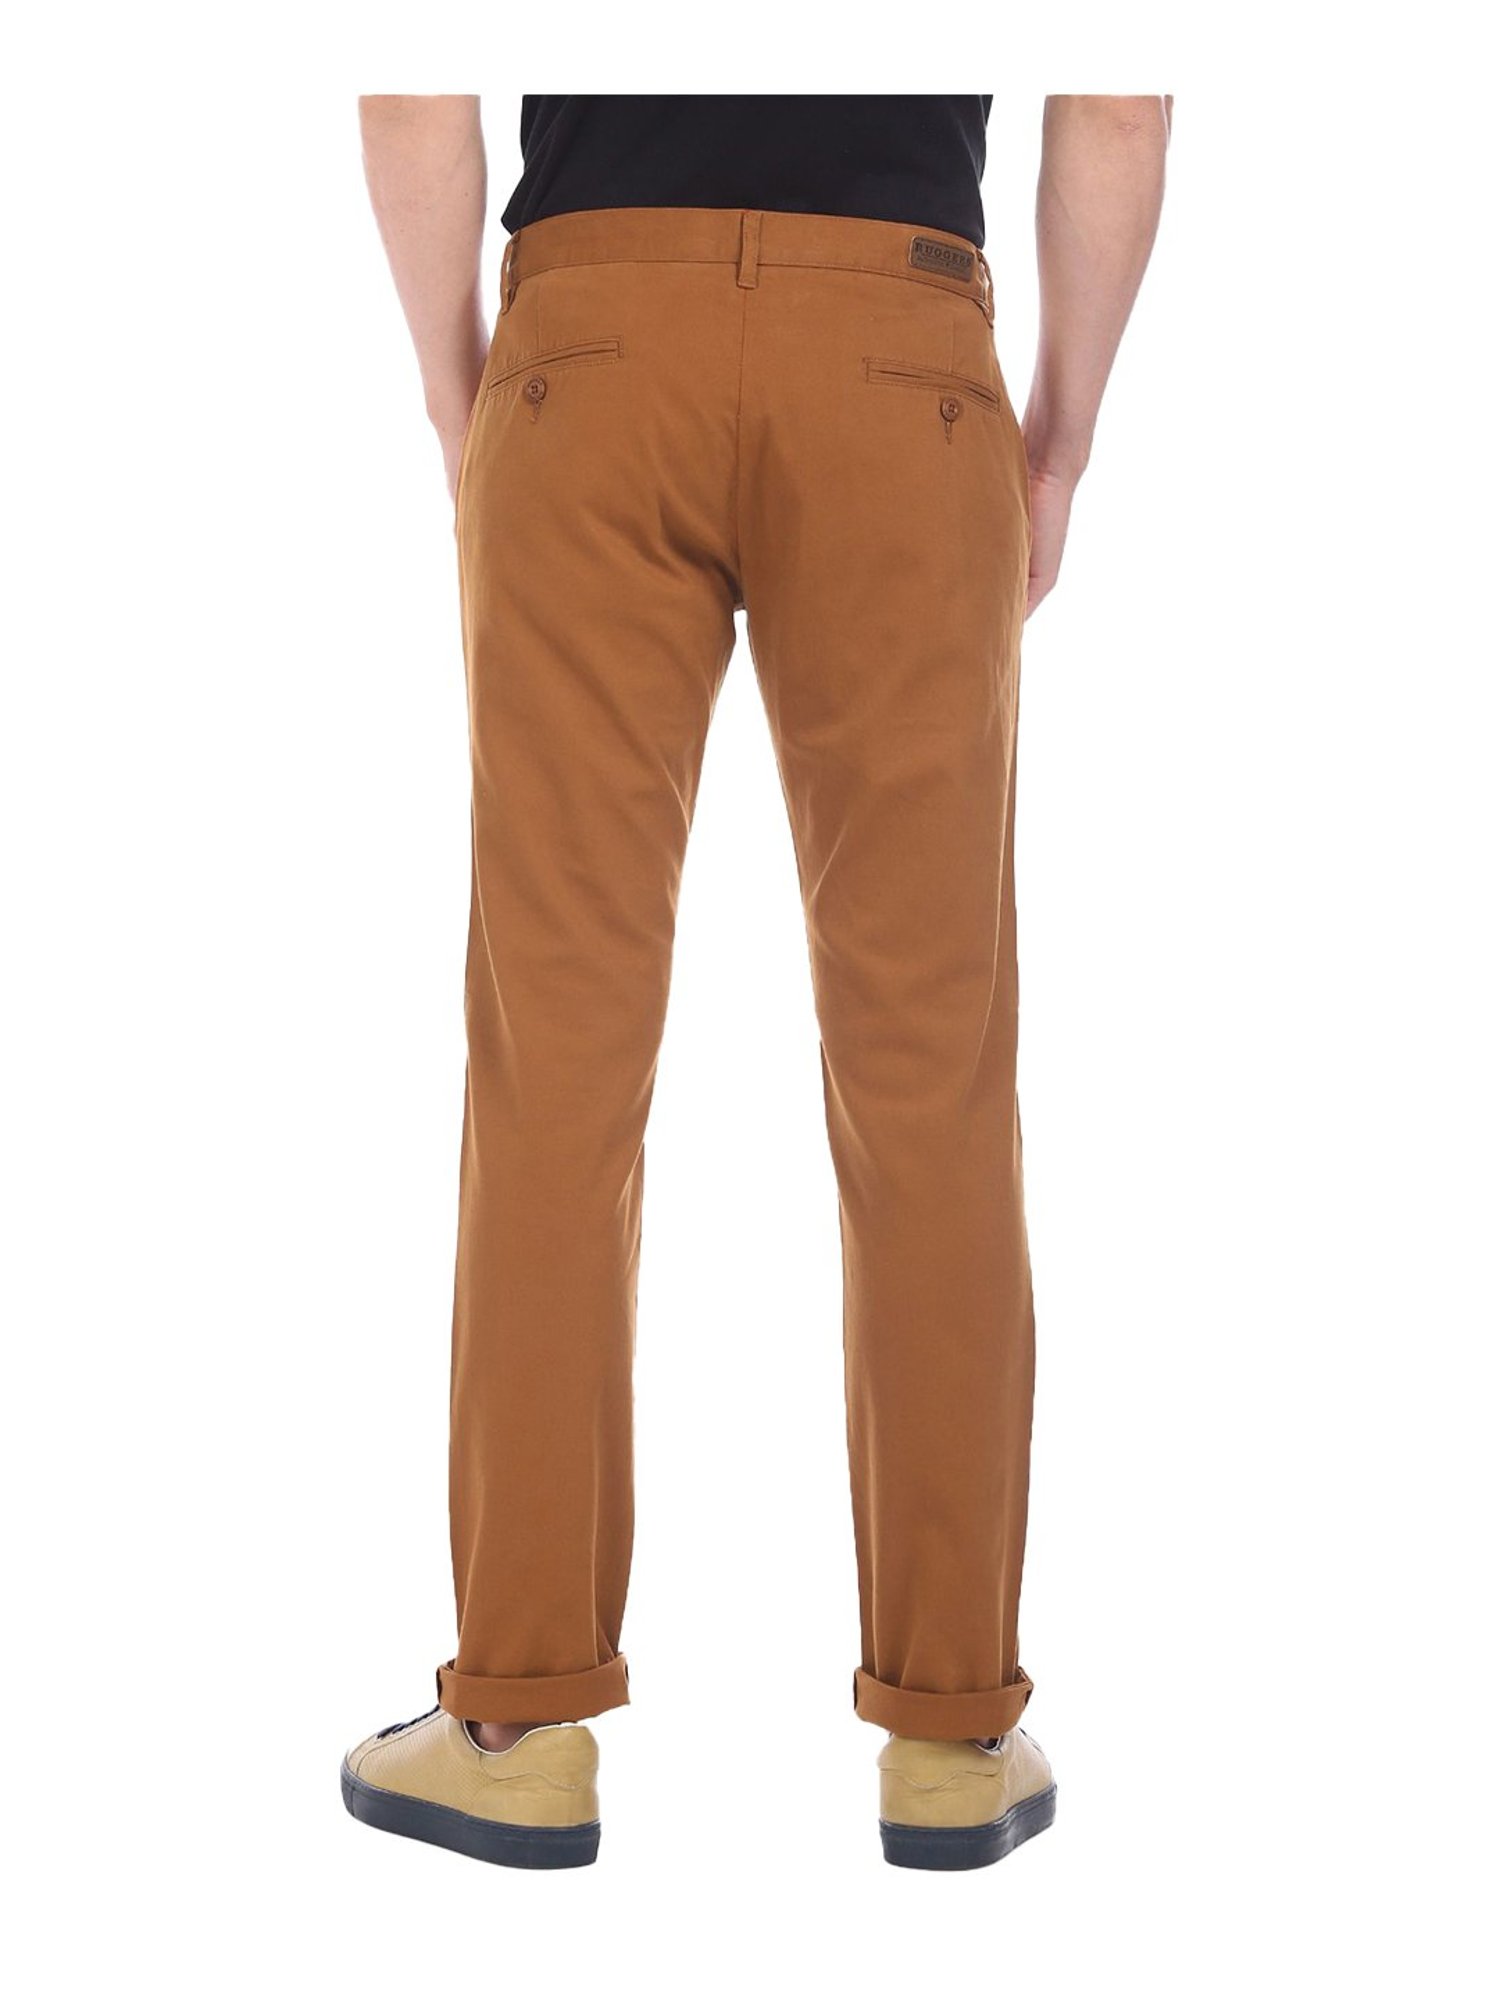 Ruggers Blue Tapered -Fit Flat Trousers - Buy Ruggers Blue Tapered -Fit  Flat Trousers Online at Best Prices in India on Snapdeal